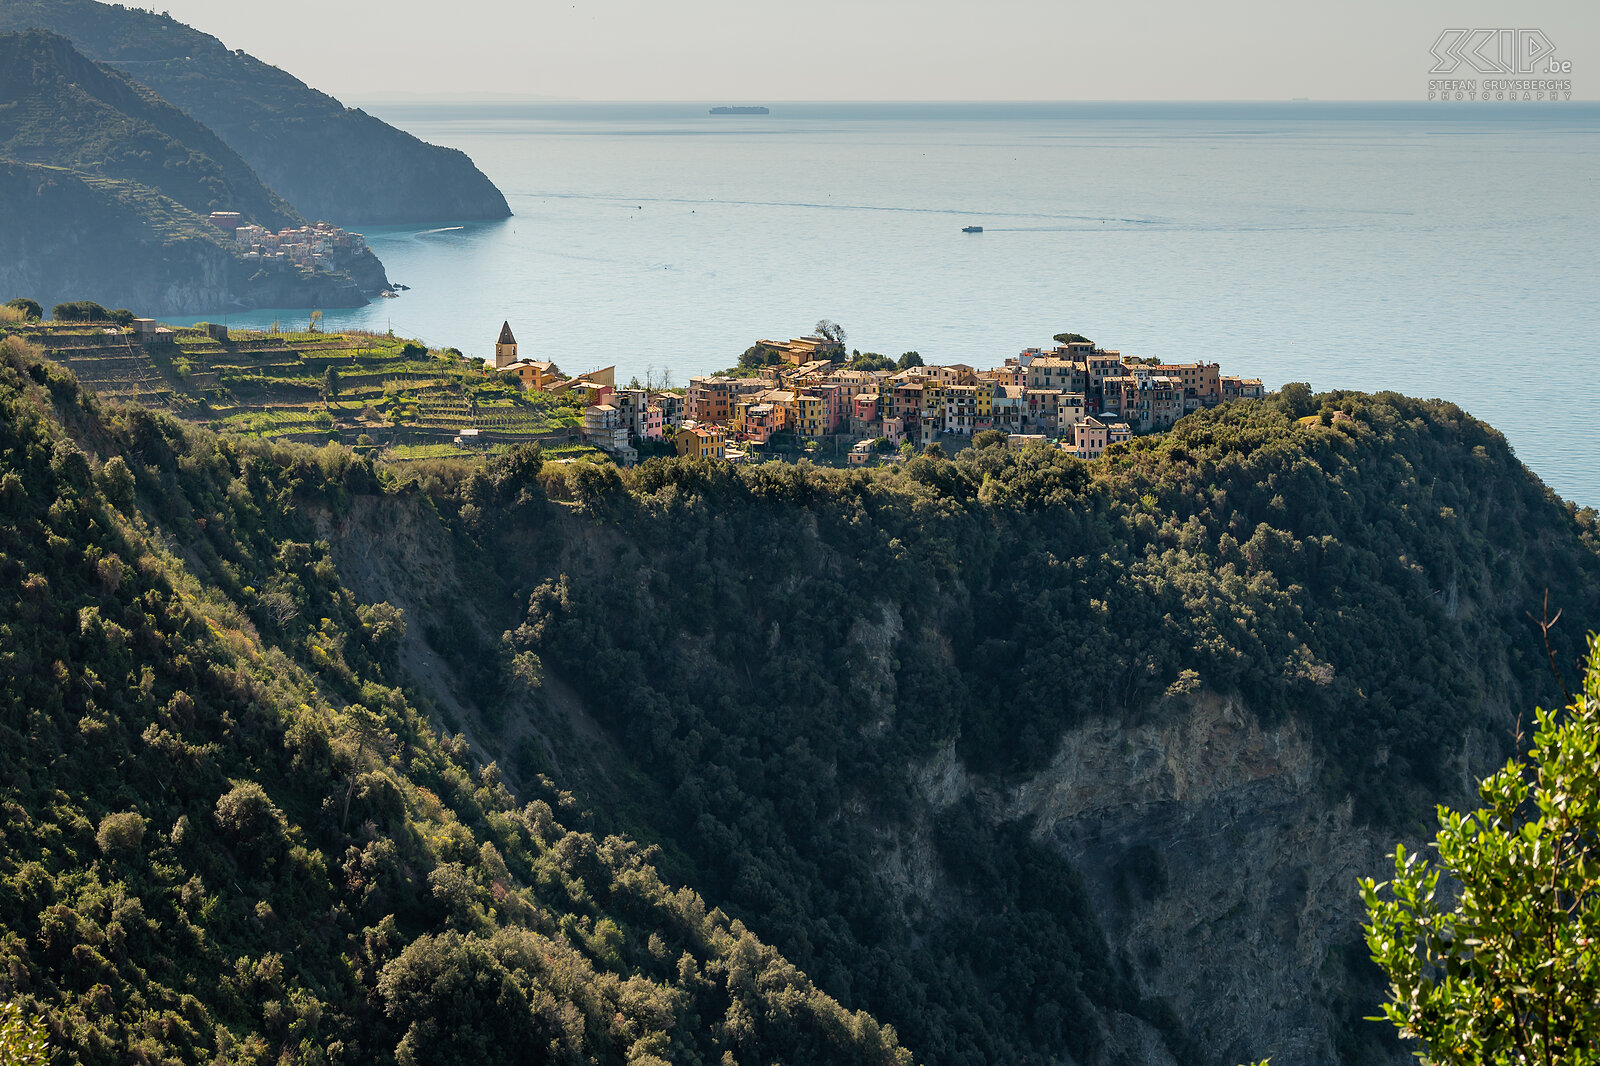 Corniglia Corniglia is the central village of the Cinque Terre but it is about 100m high and has no direct access to the sea. Around the village are many vineyards and hiking trails. We went there by train and then walked back along the coast to Vernazza. Stefan Cruysberghs